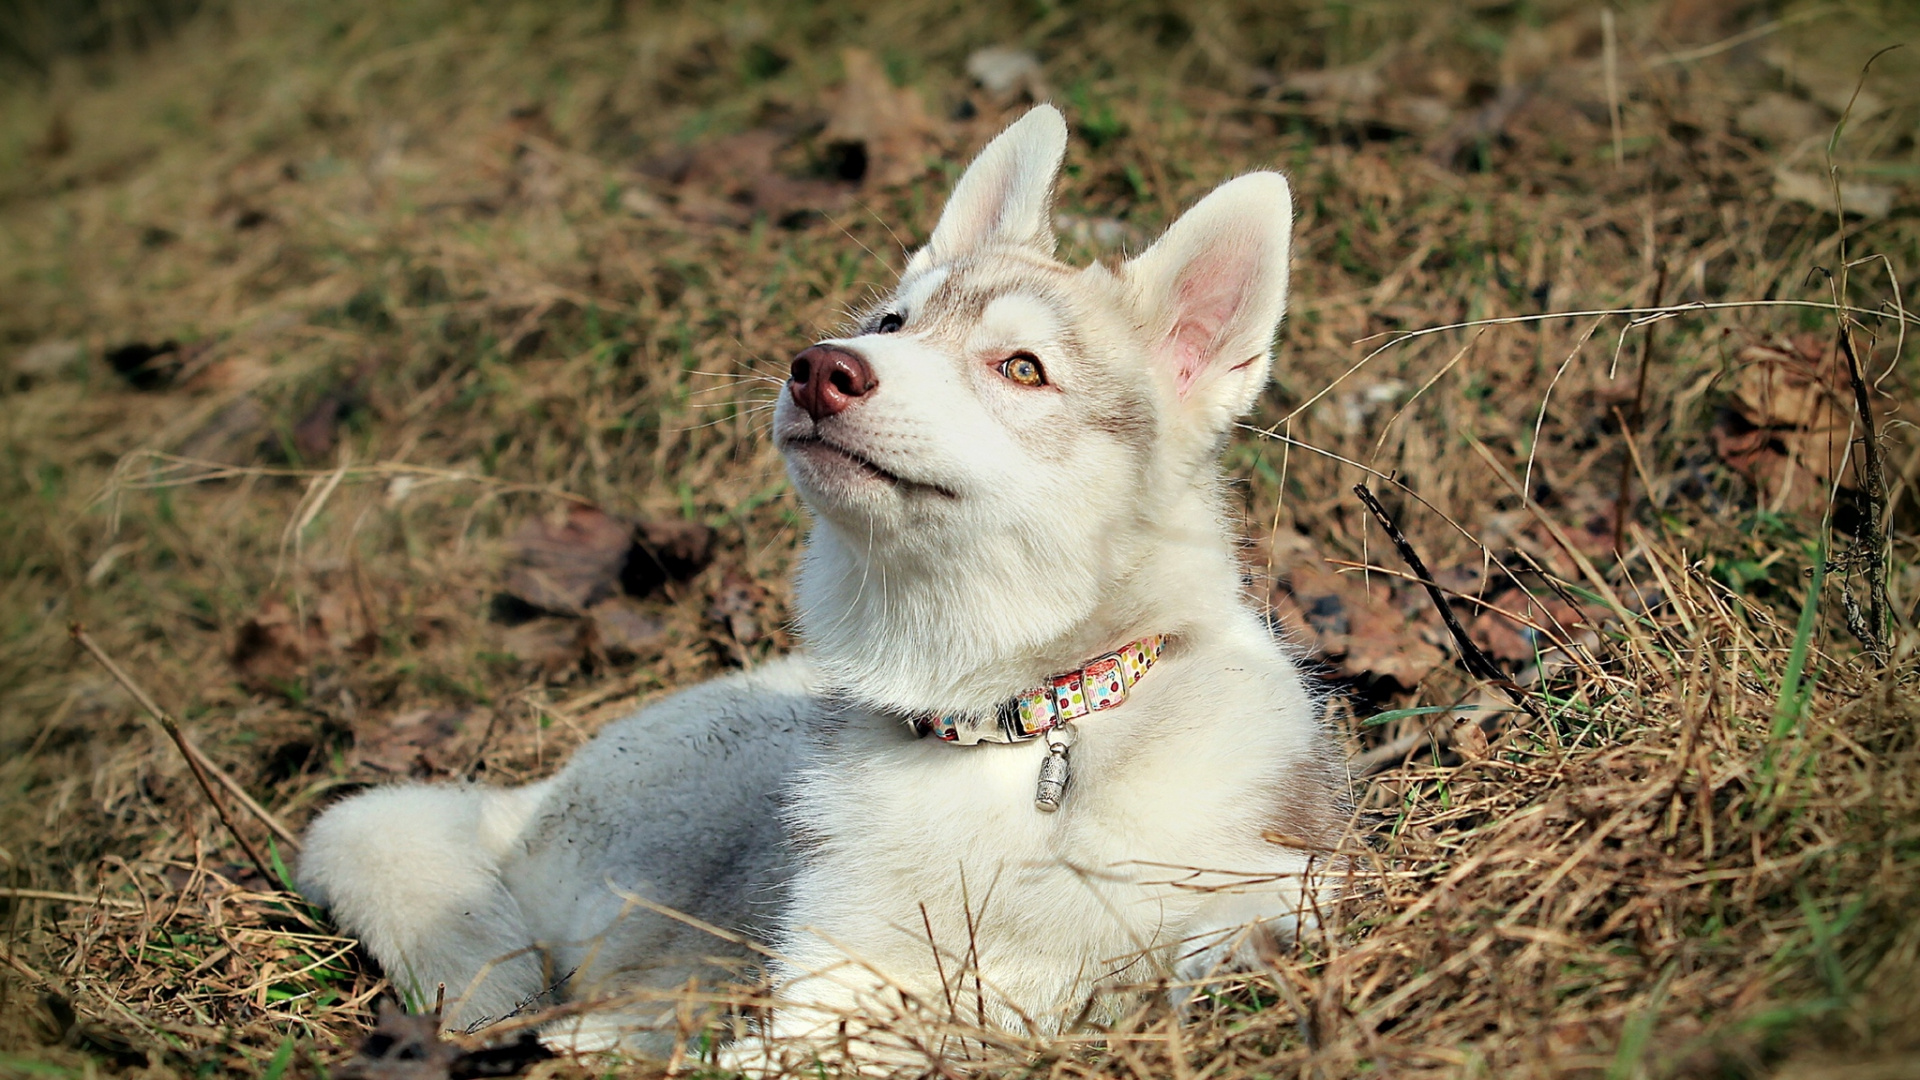 White and Black Siberian Husky Puppy on Brown Grass Field During Daytime. Wallpaper in 1920x1080 Resolution